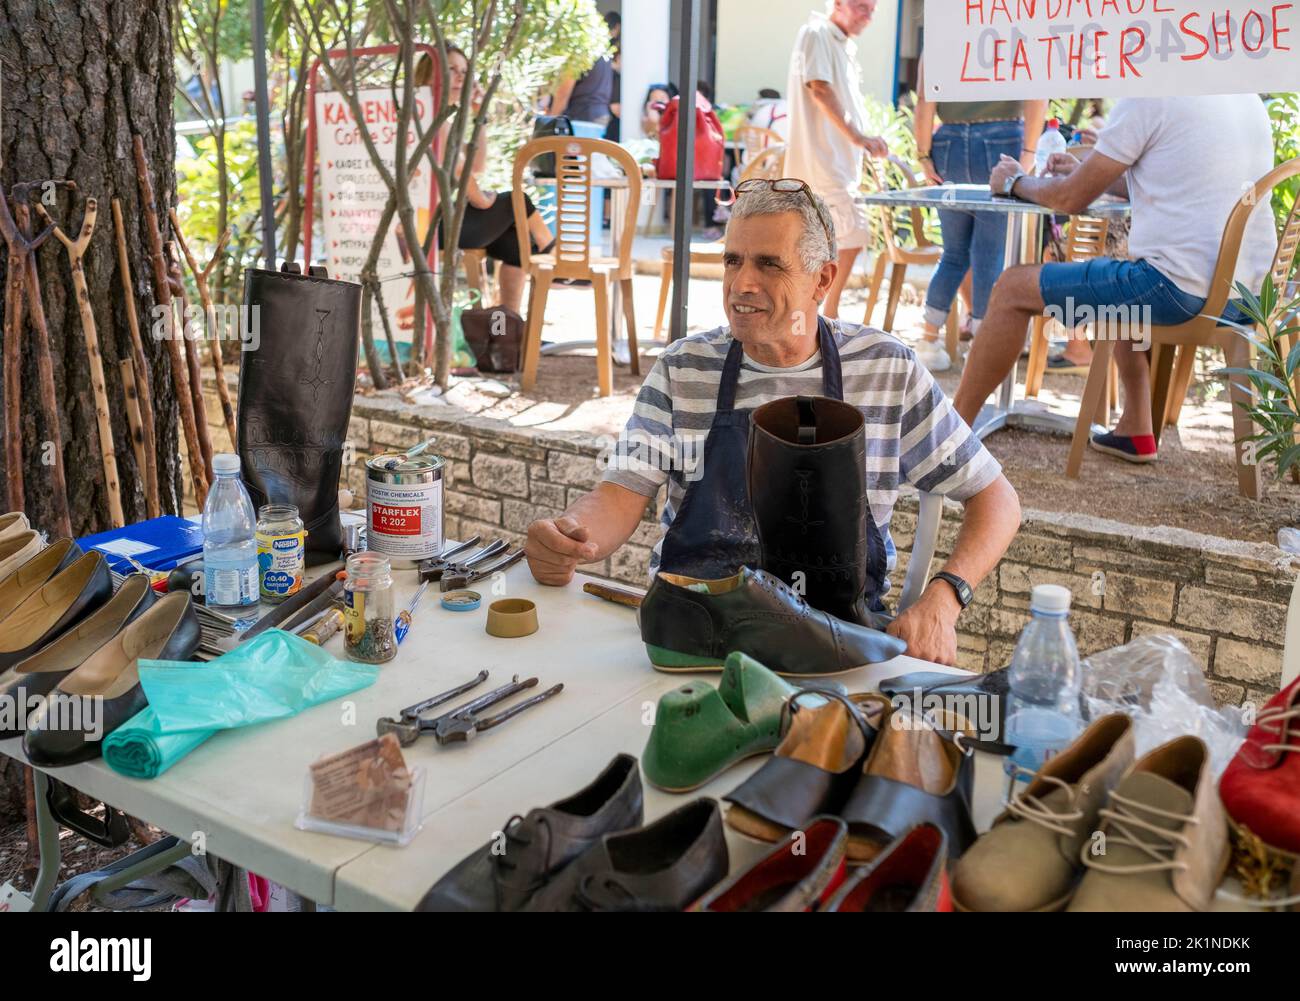 A cobbler speaks with customers at his stall during the Statos-Ayios Fotios Rural Festival. Paphos region, Cyprus Stock Photo